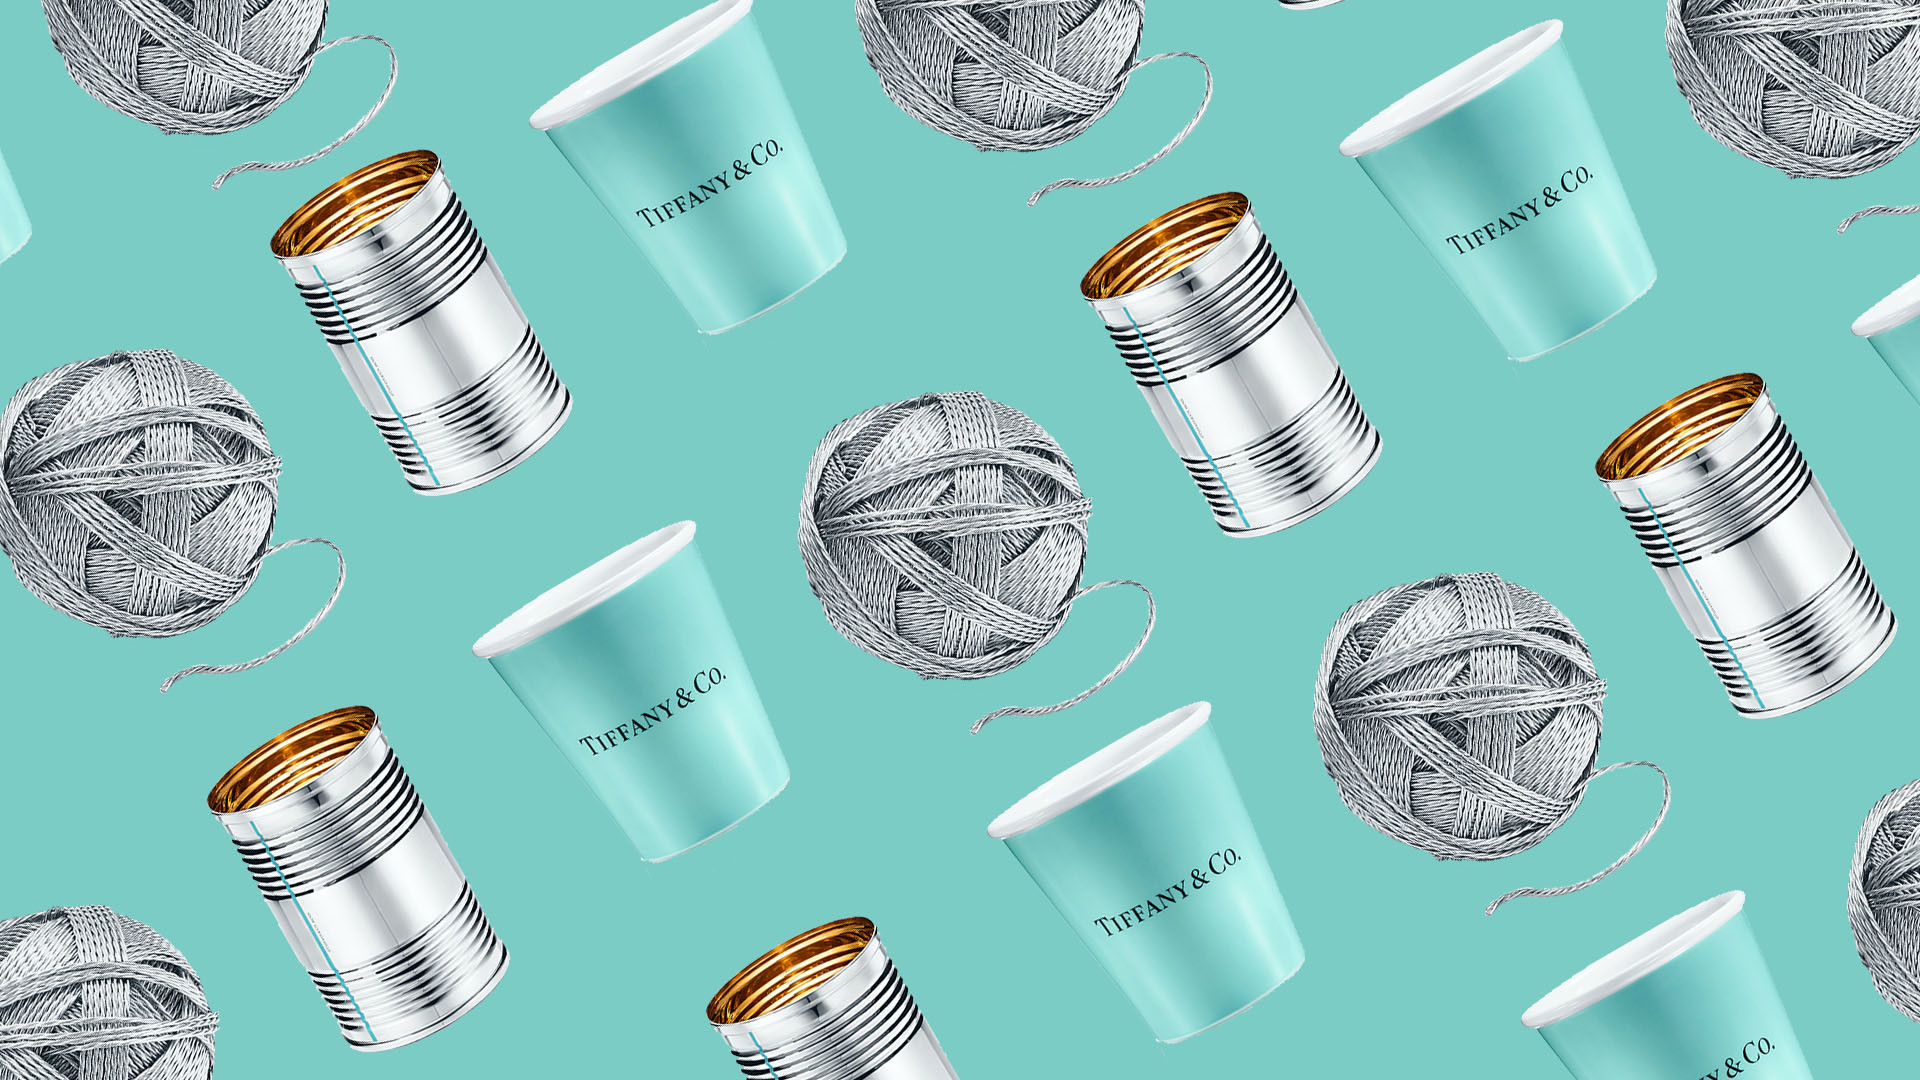 1920x1080 Tiffany & Co. launched an outrageously indulgent home and accessories line